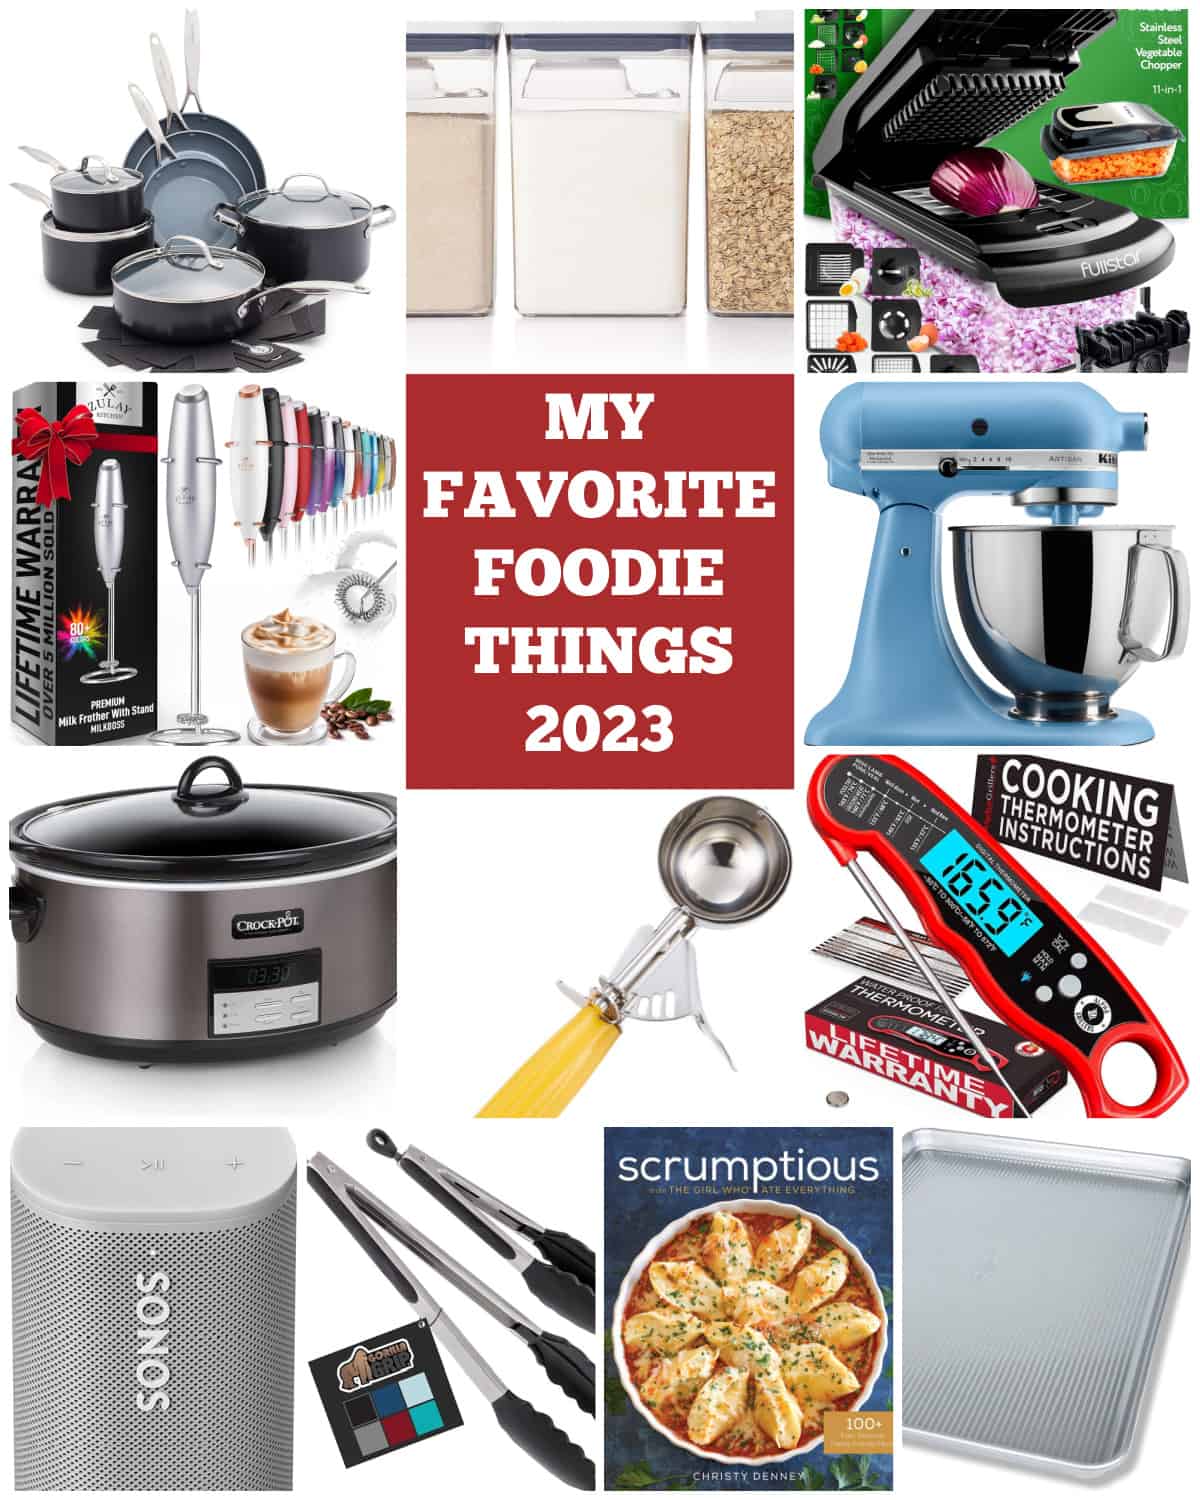 My Favorite Foodie Things 2023 - The Girl Who Ate Everything